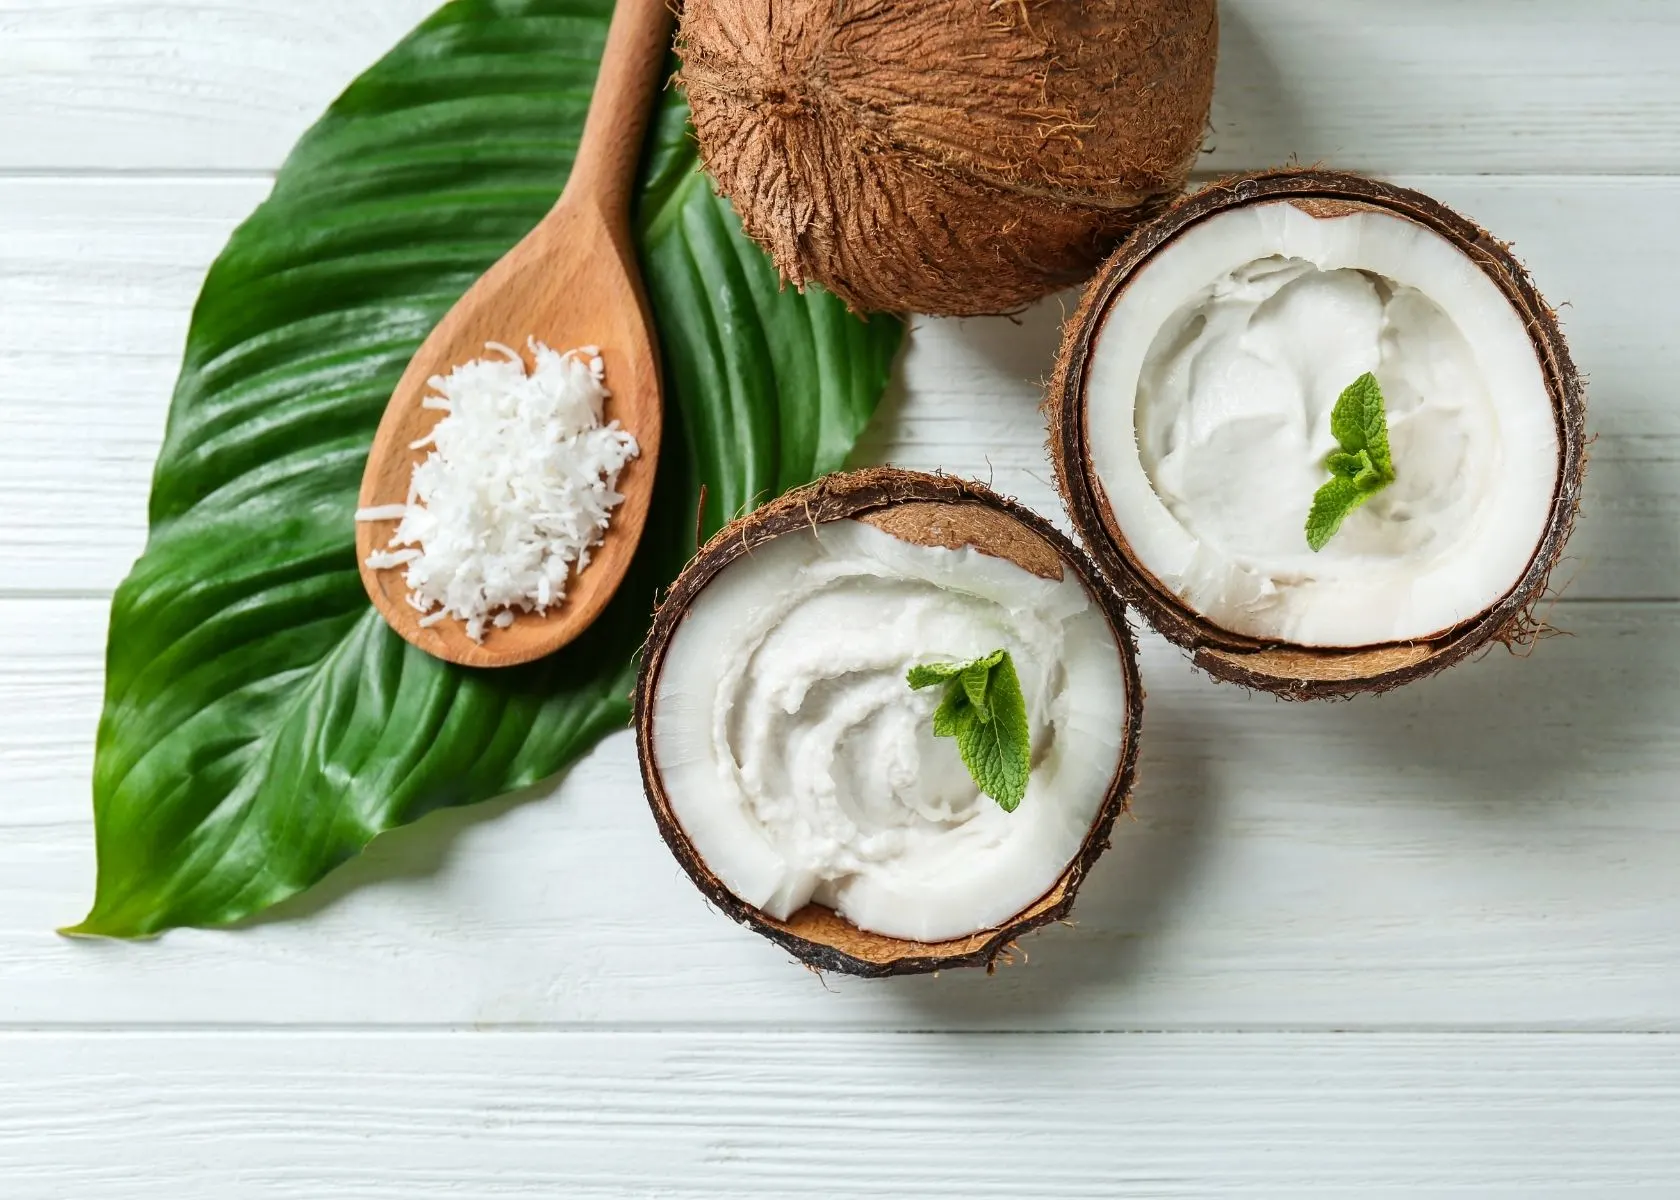 Coconut cream in coconut shells next to large green leaf and shaved coconut.